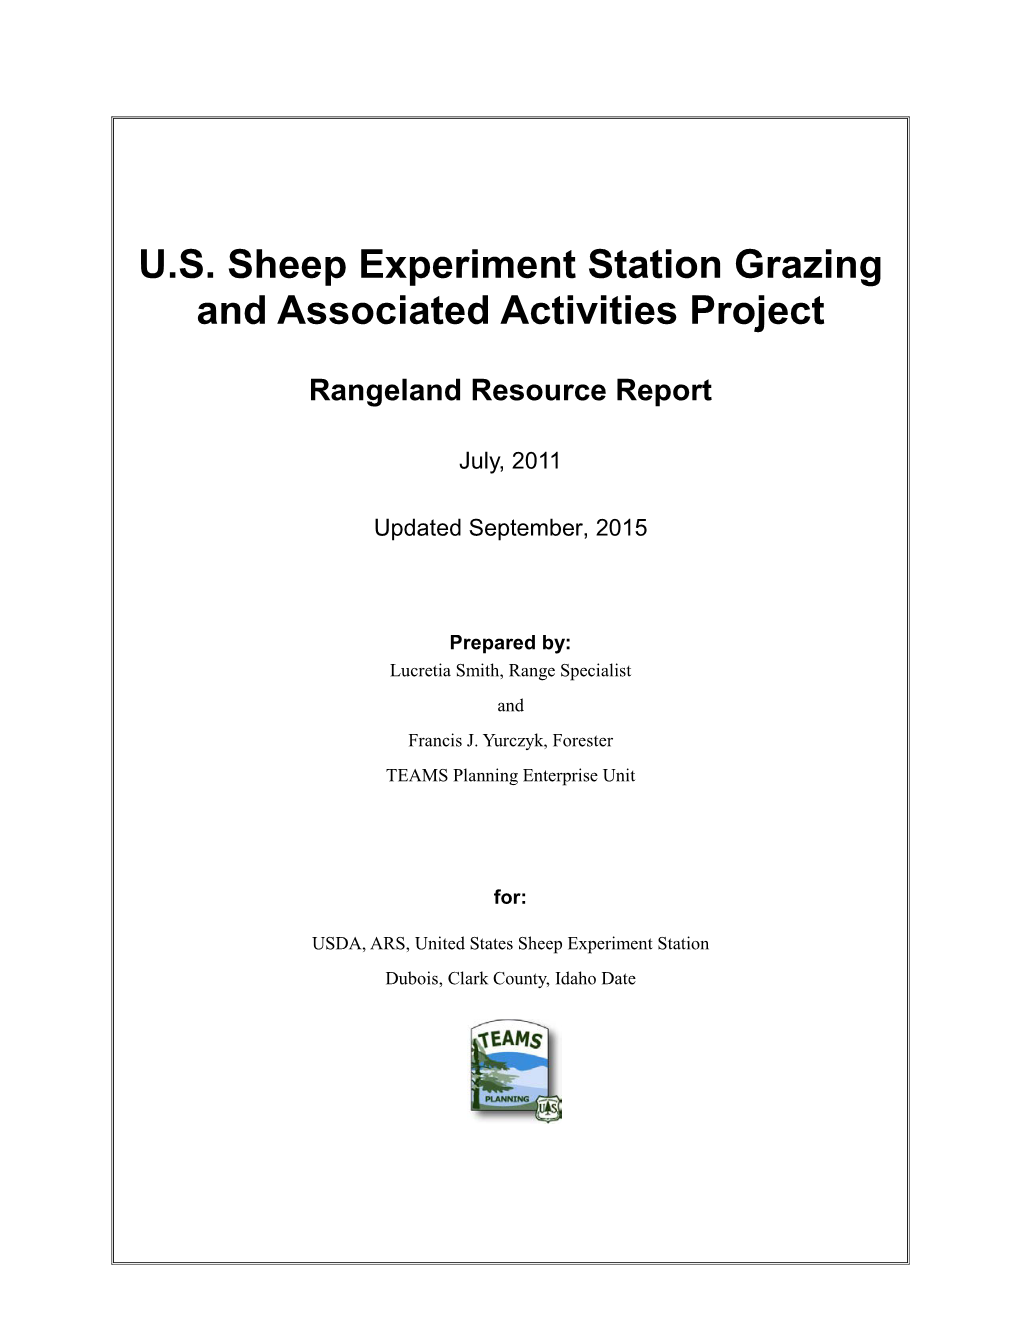 U.S. Sheep Experiment Station Grazing and Associated Activities Project